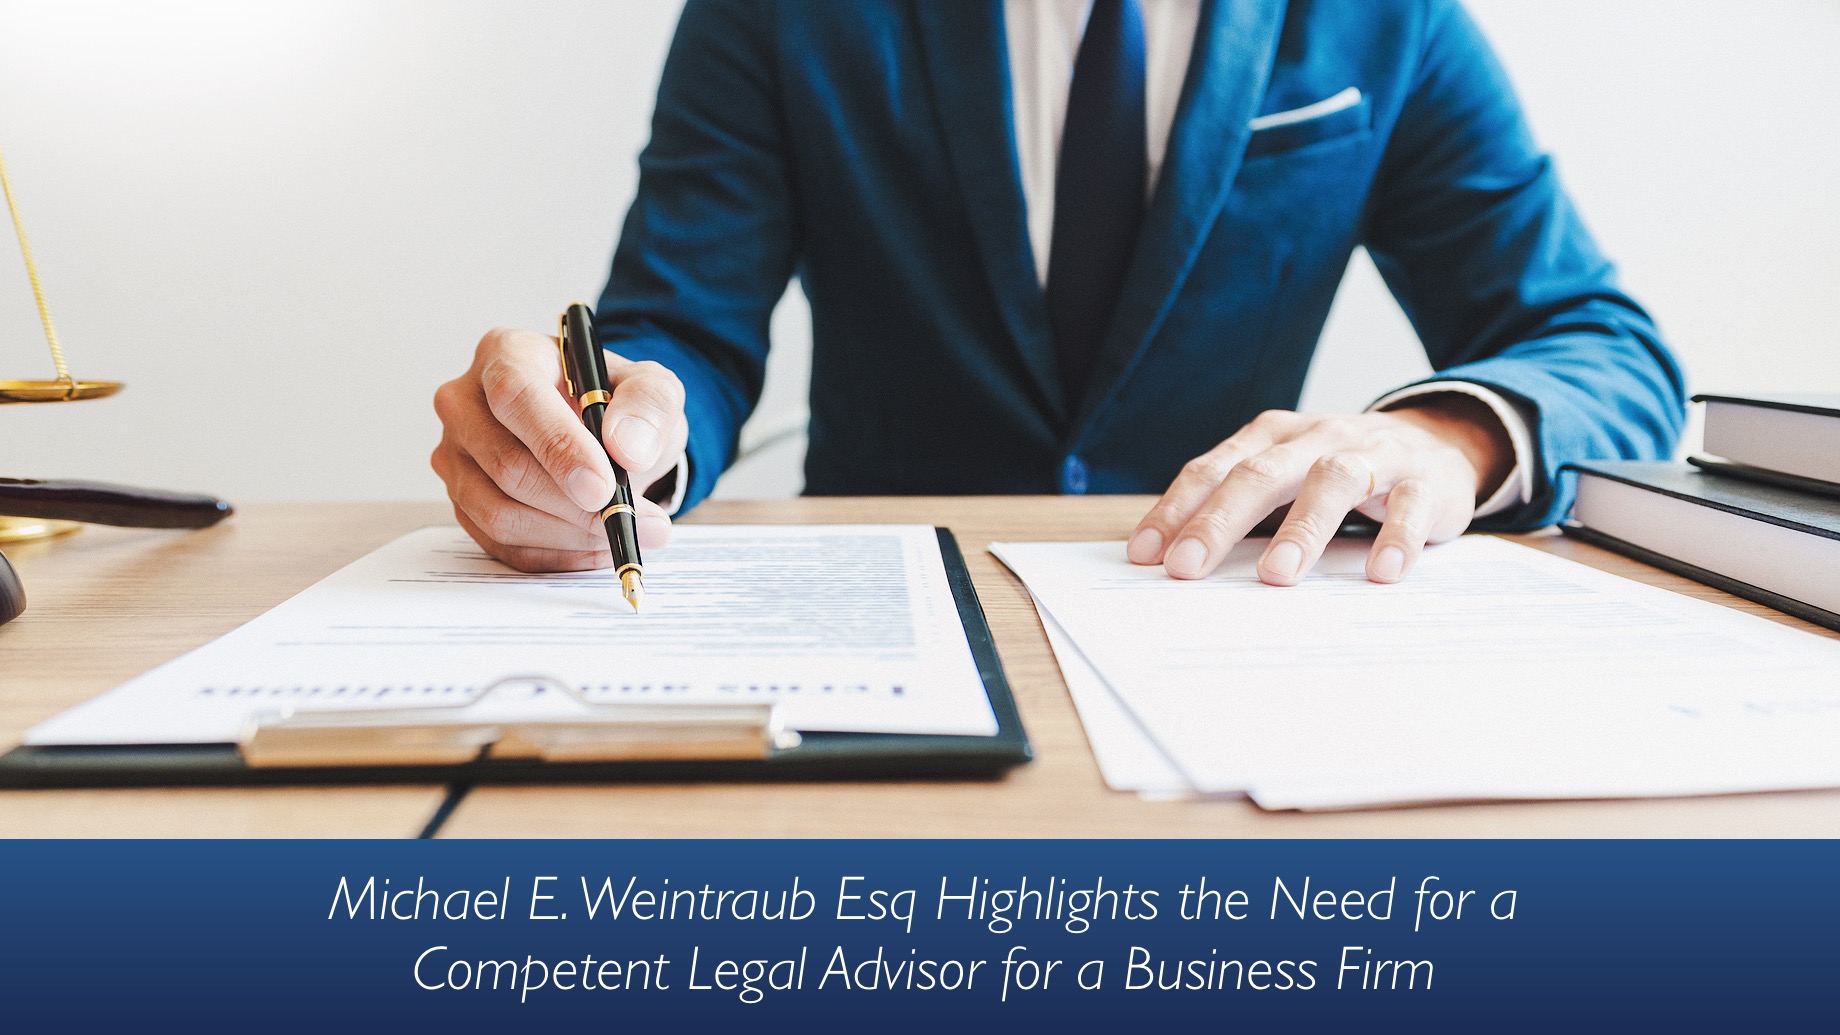 Michael E. Weintraub Esq Highlights the Need for a Competent Legal Advisor for a Business Firm